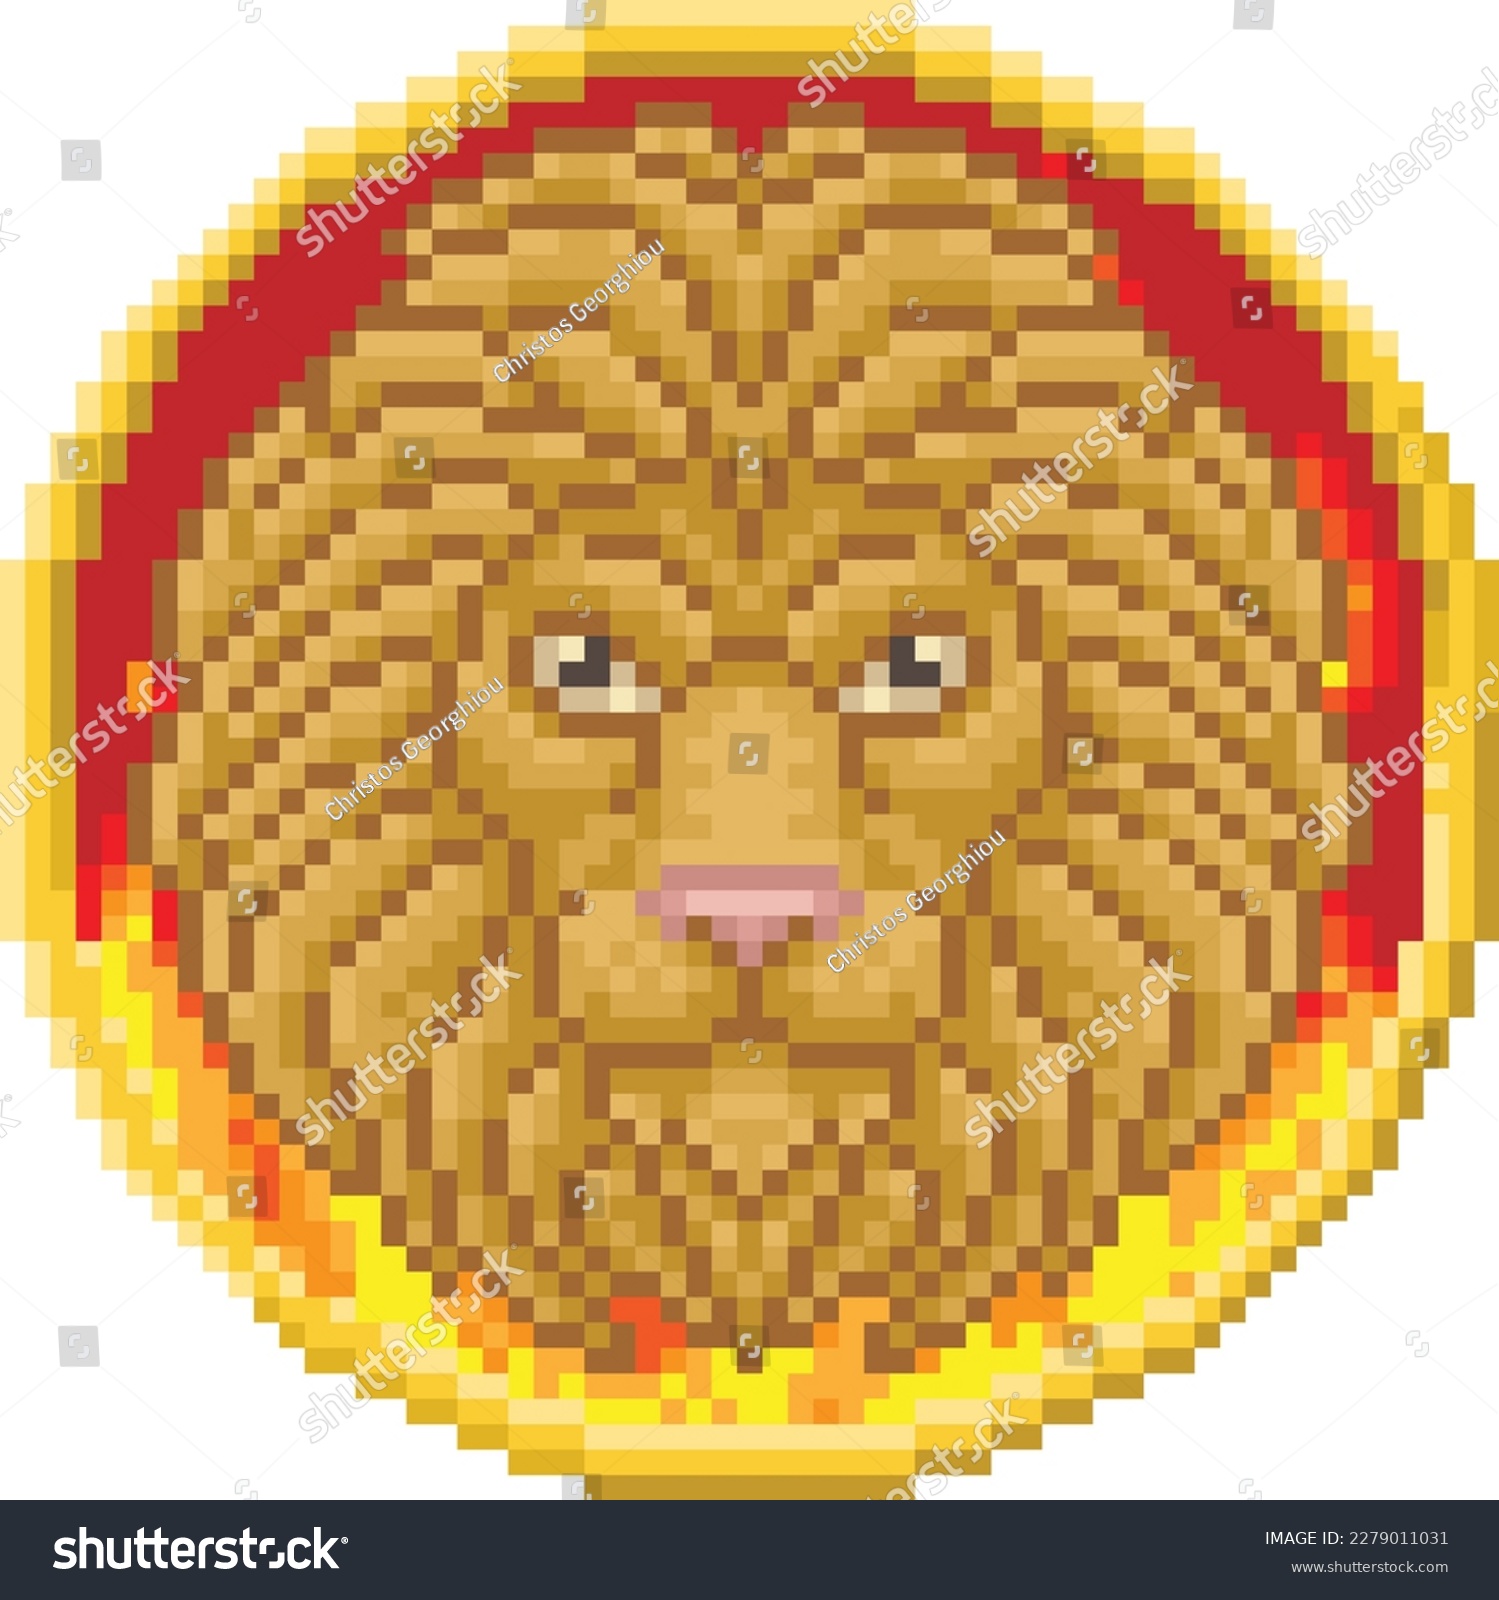 SVG of A zodiac horoscope or astrology Leo lion sign in a retro video game arcade 8 bit pixel art style svg